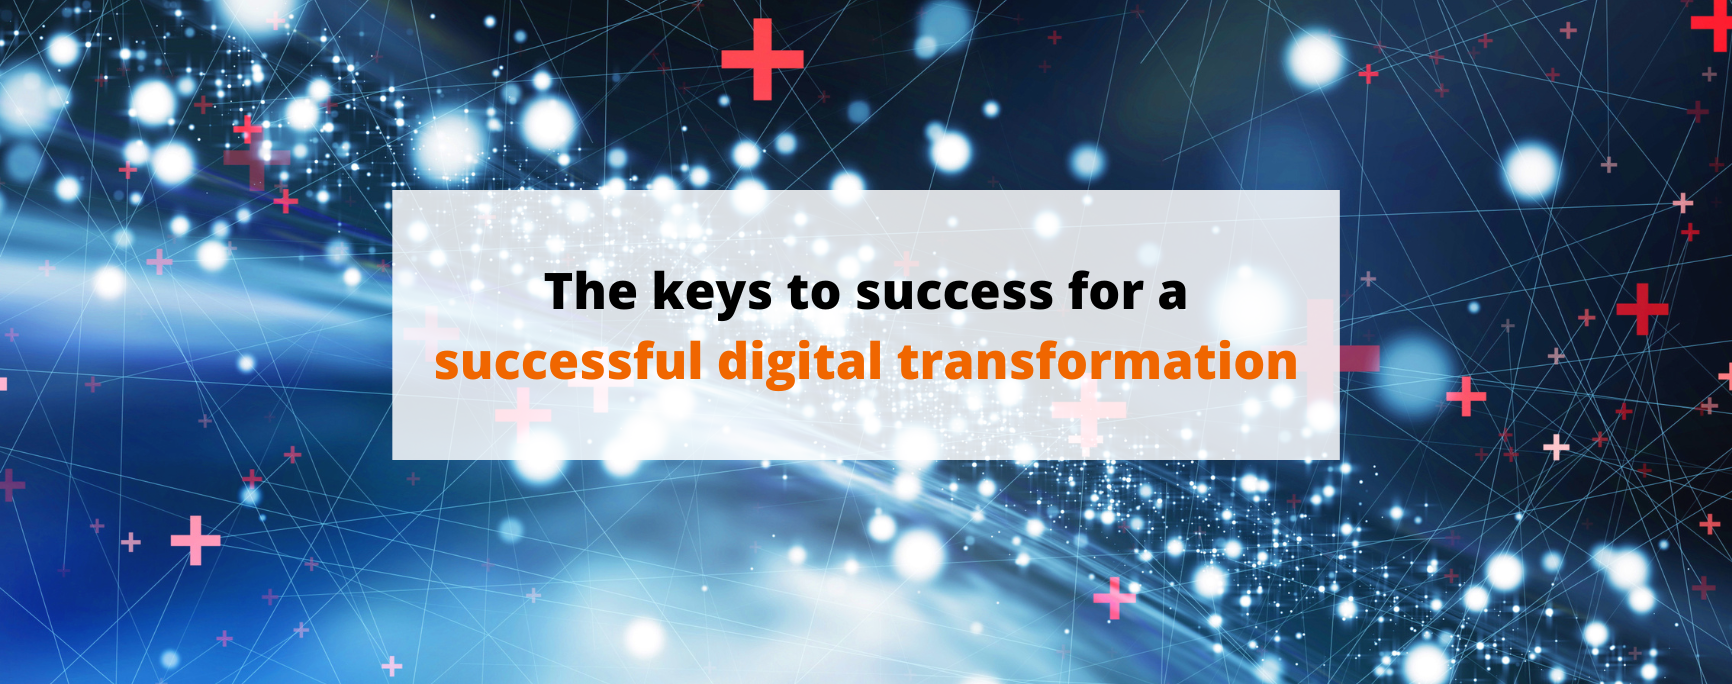 The keys to success for a successful digital transformation